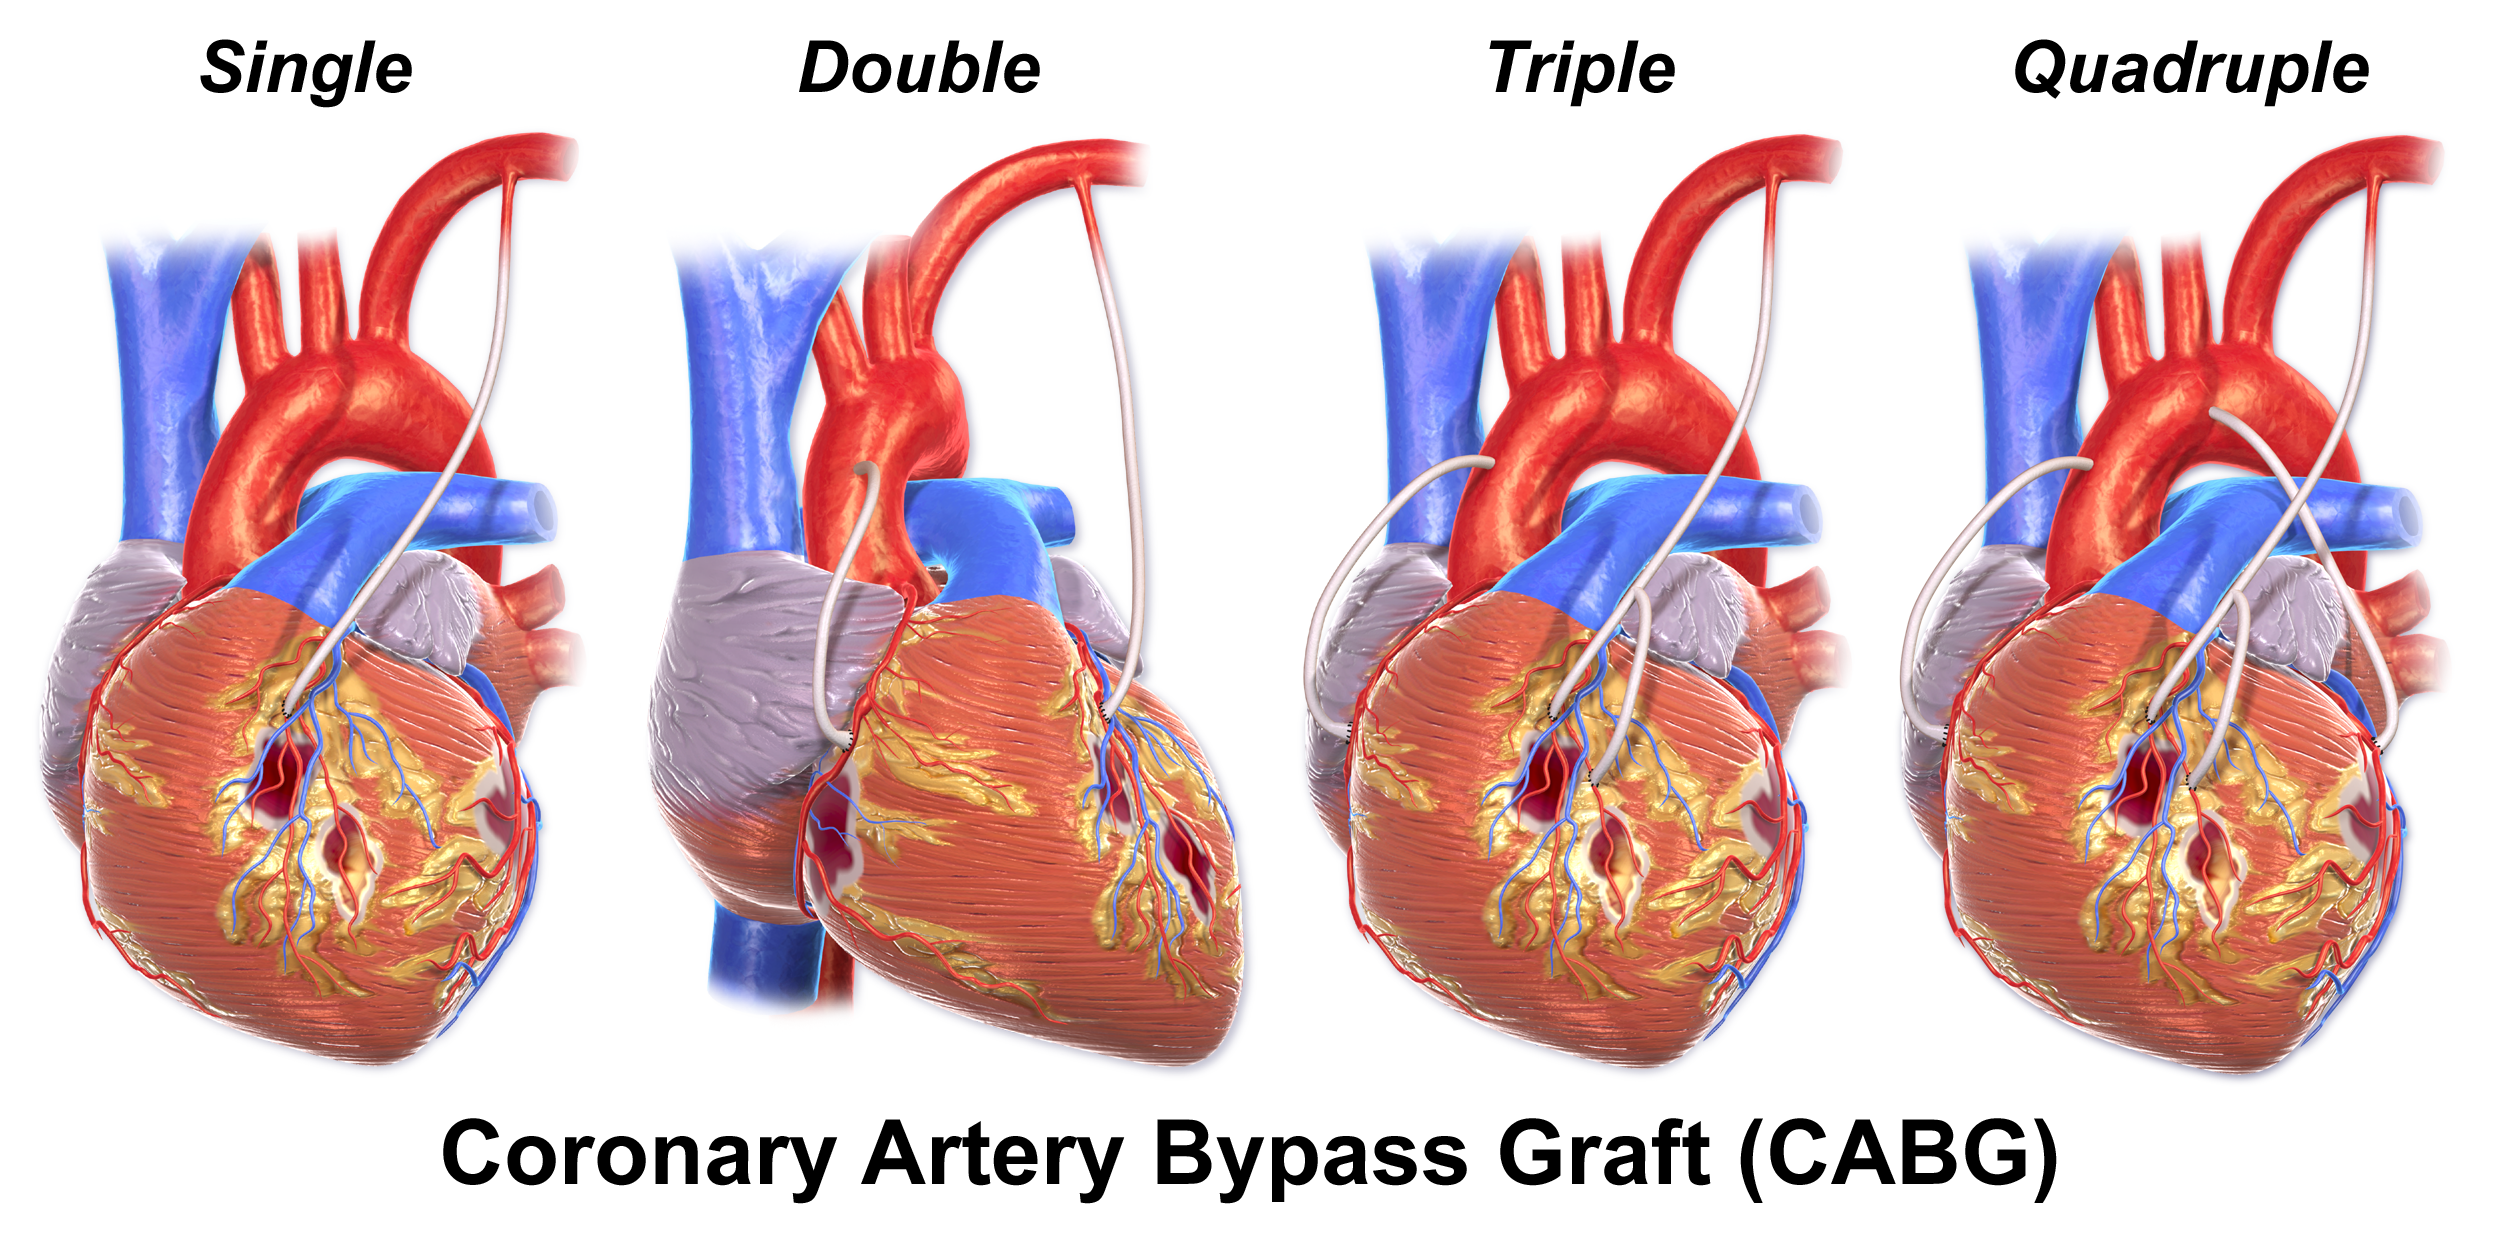 Four illustrations include single, double, triple and quadruple bypass grafts.